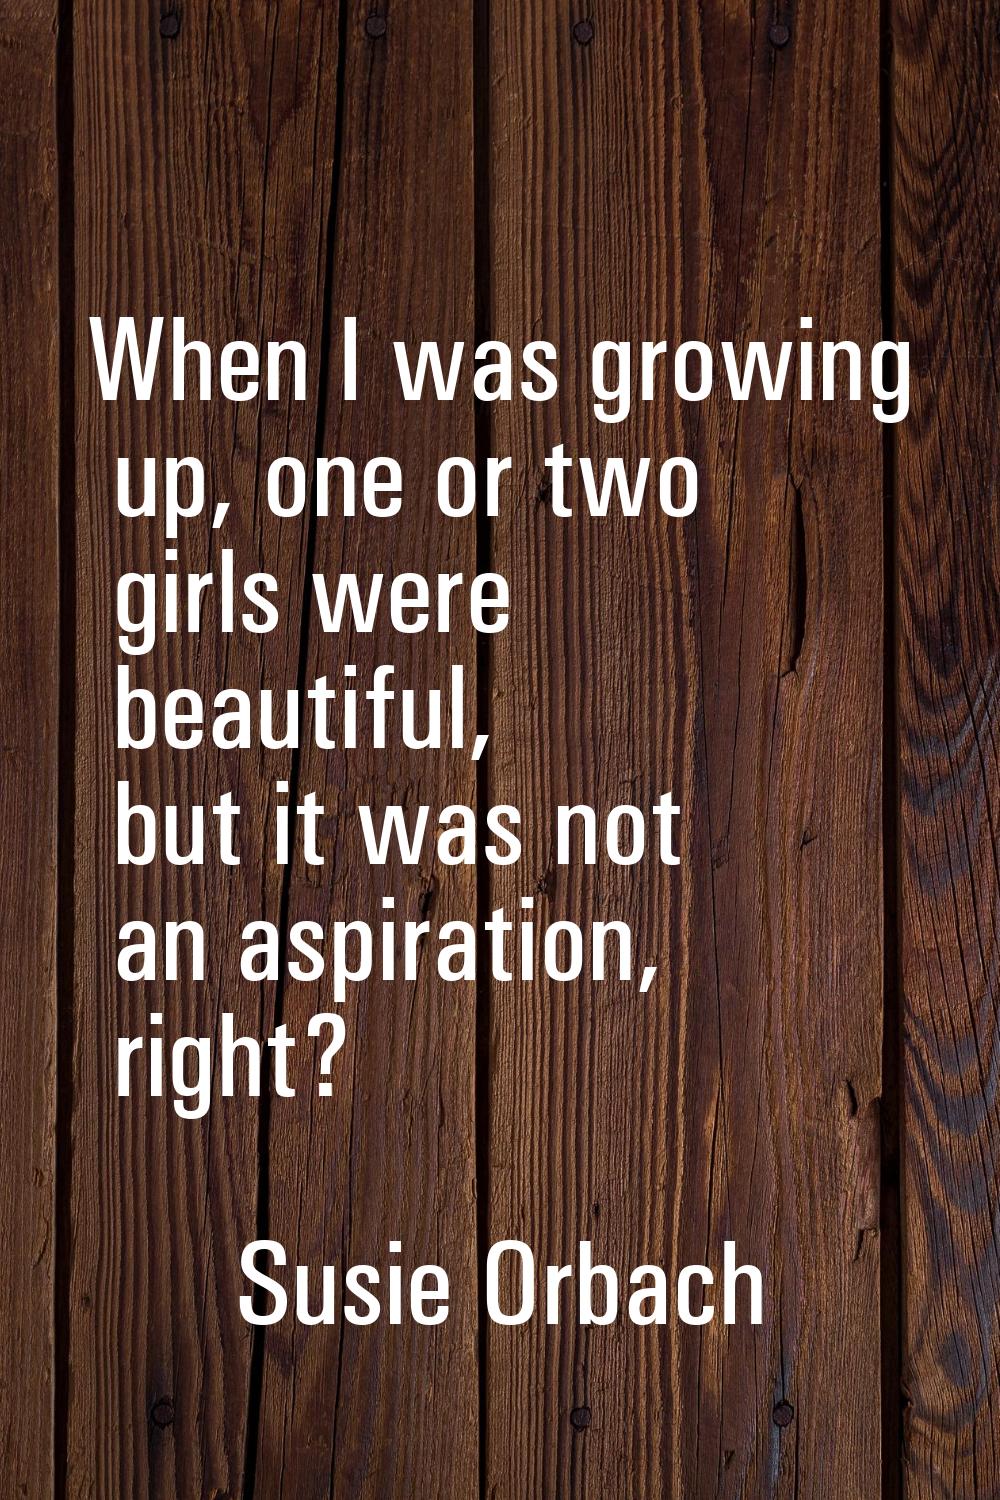 When I was growing up, one or two girls were beautiful, but it was not an aspiration, right?